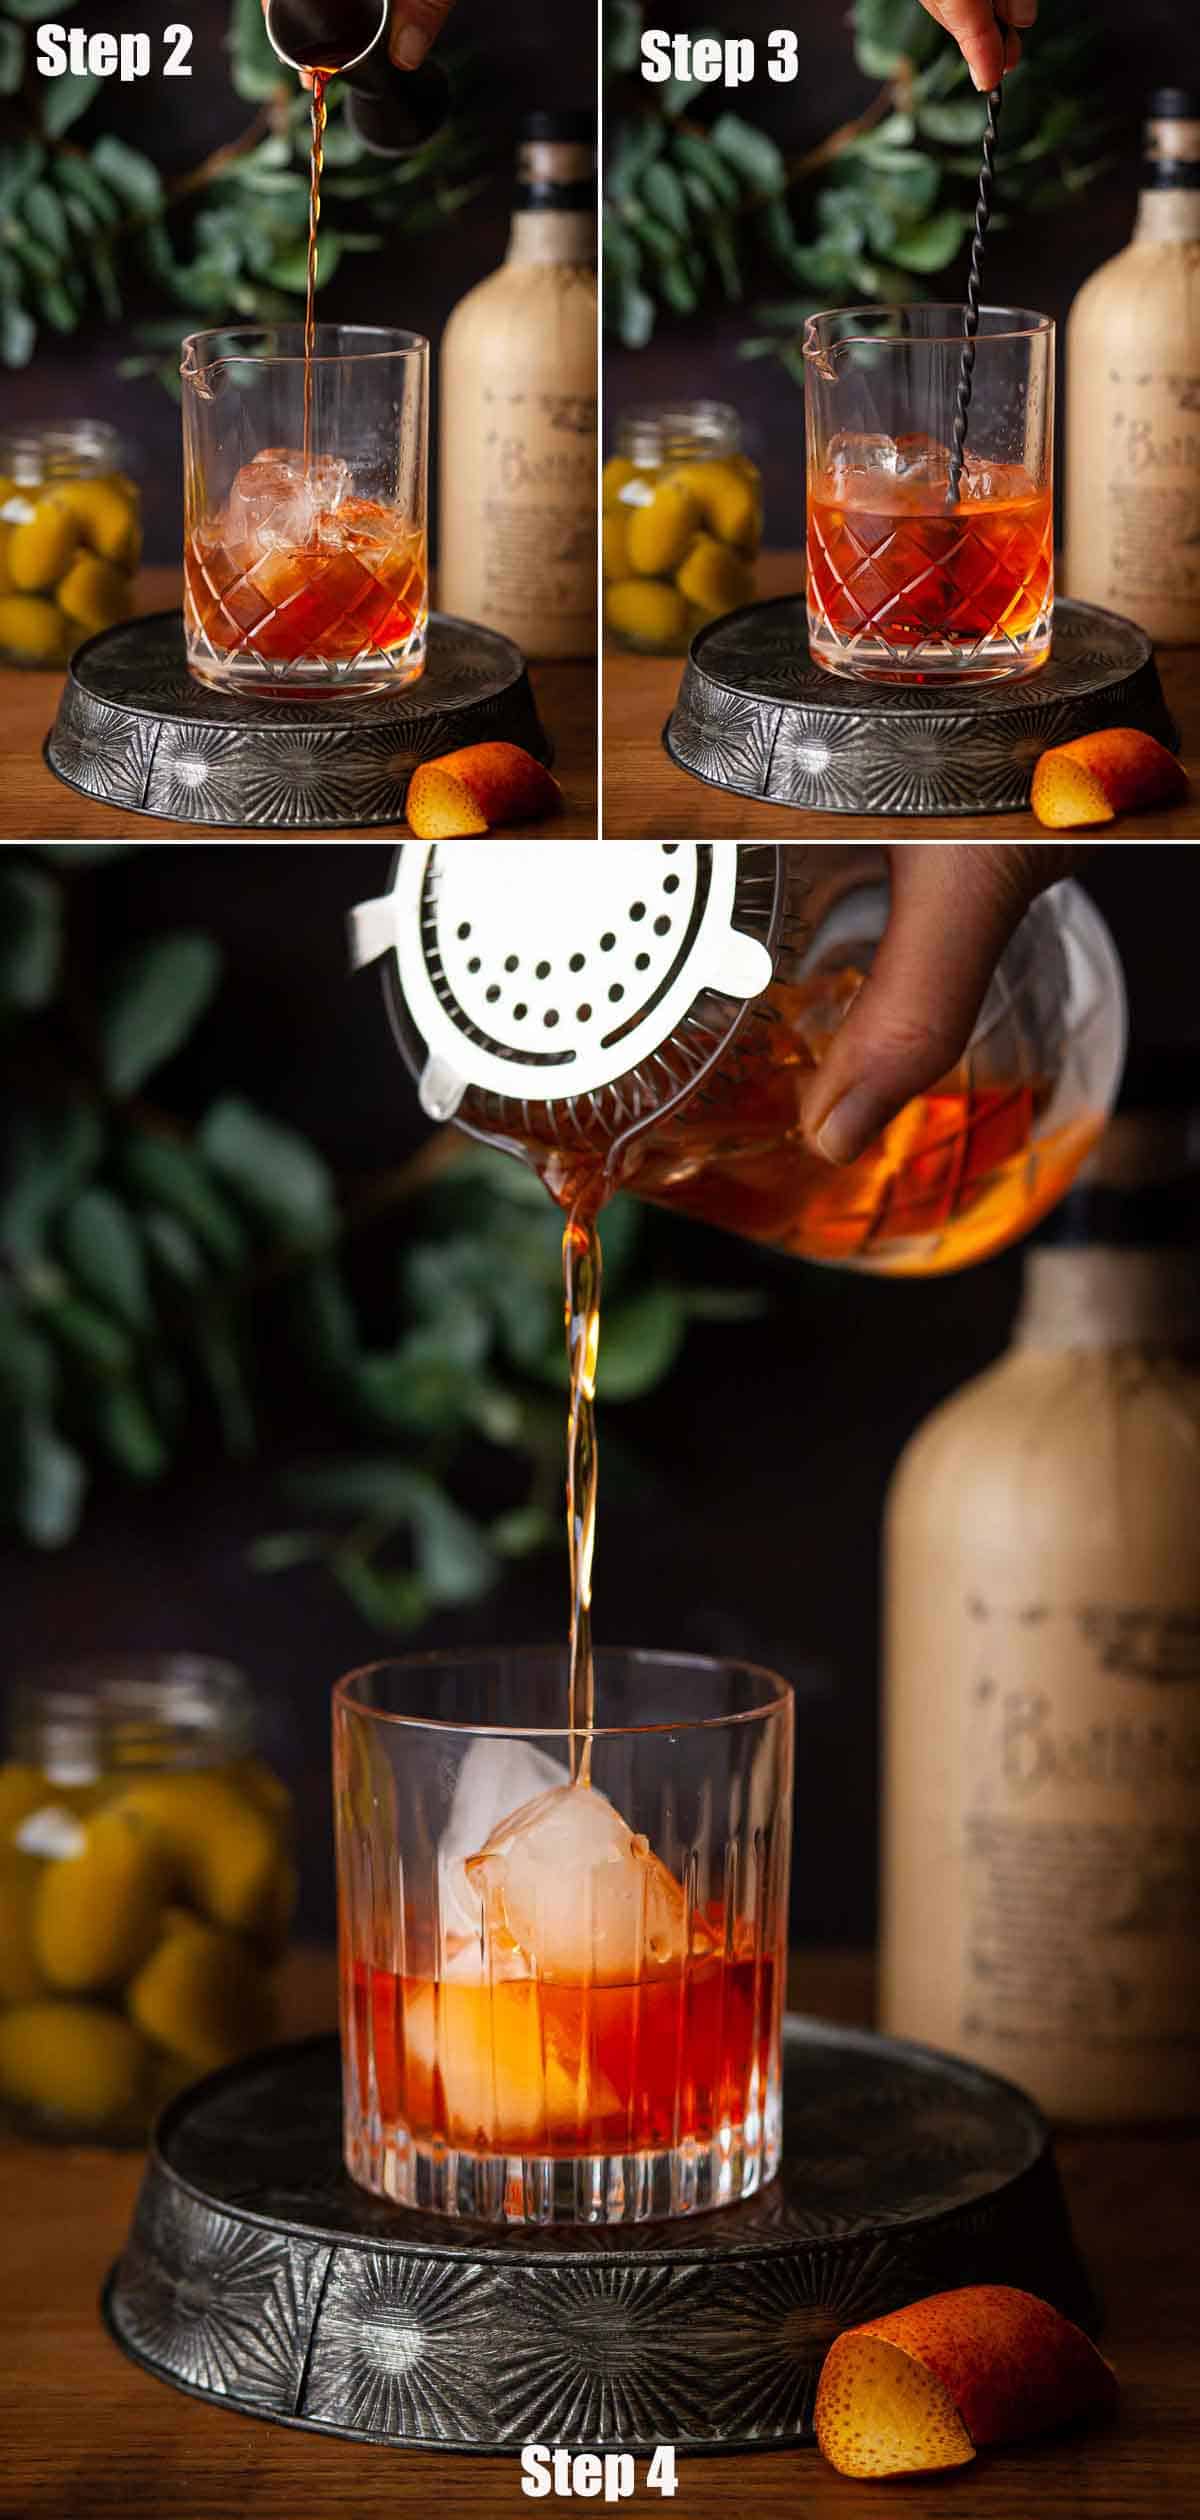 Collage of images showing a cocktail being made.